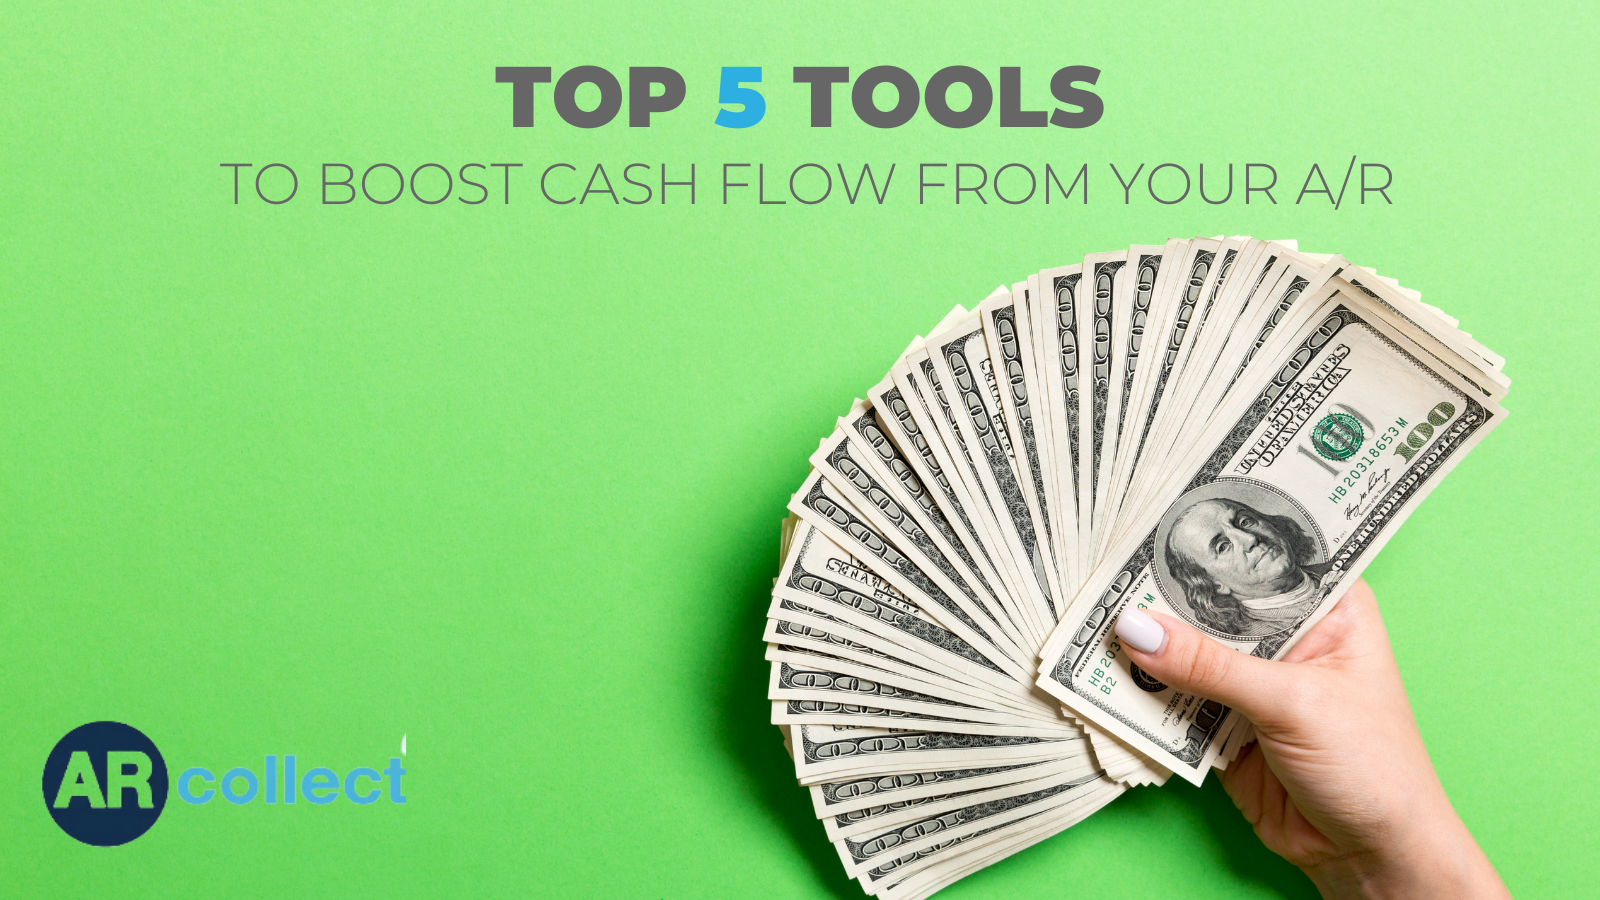 Top 5 Tools to Boost Cash Flow From Your A/R